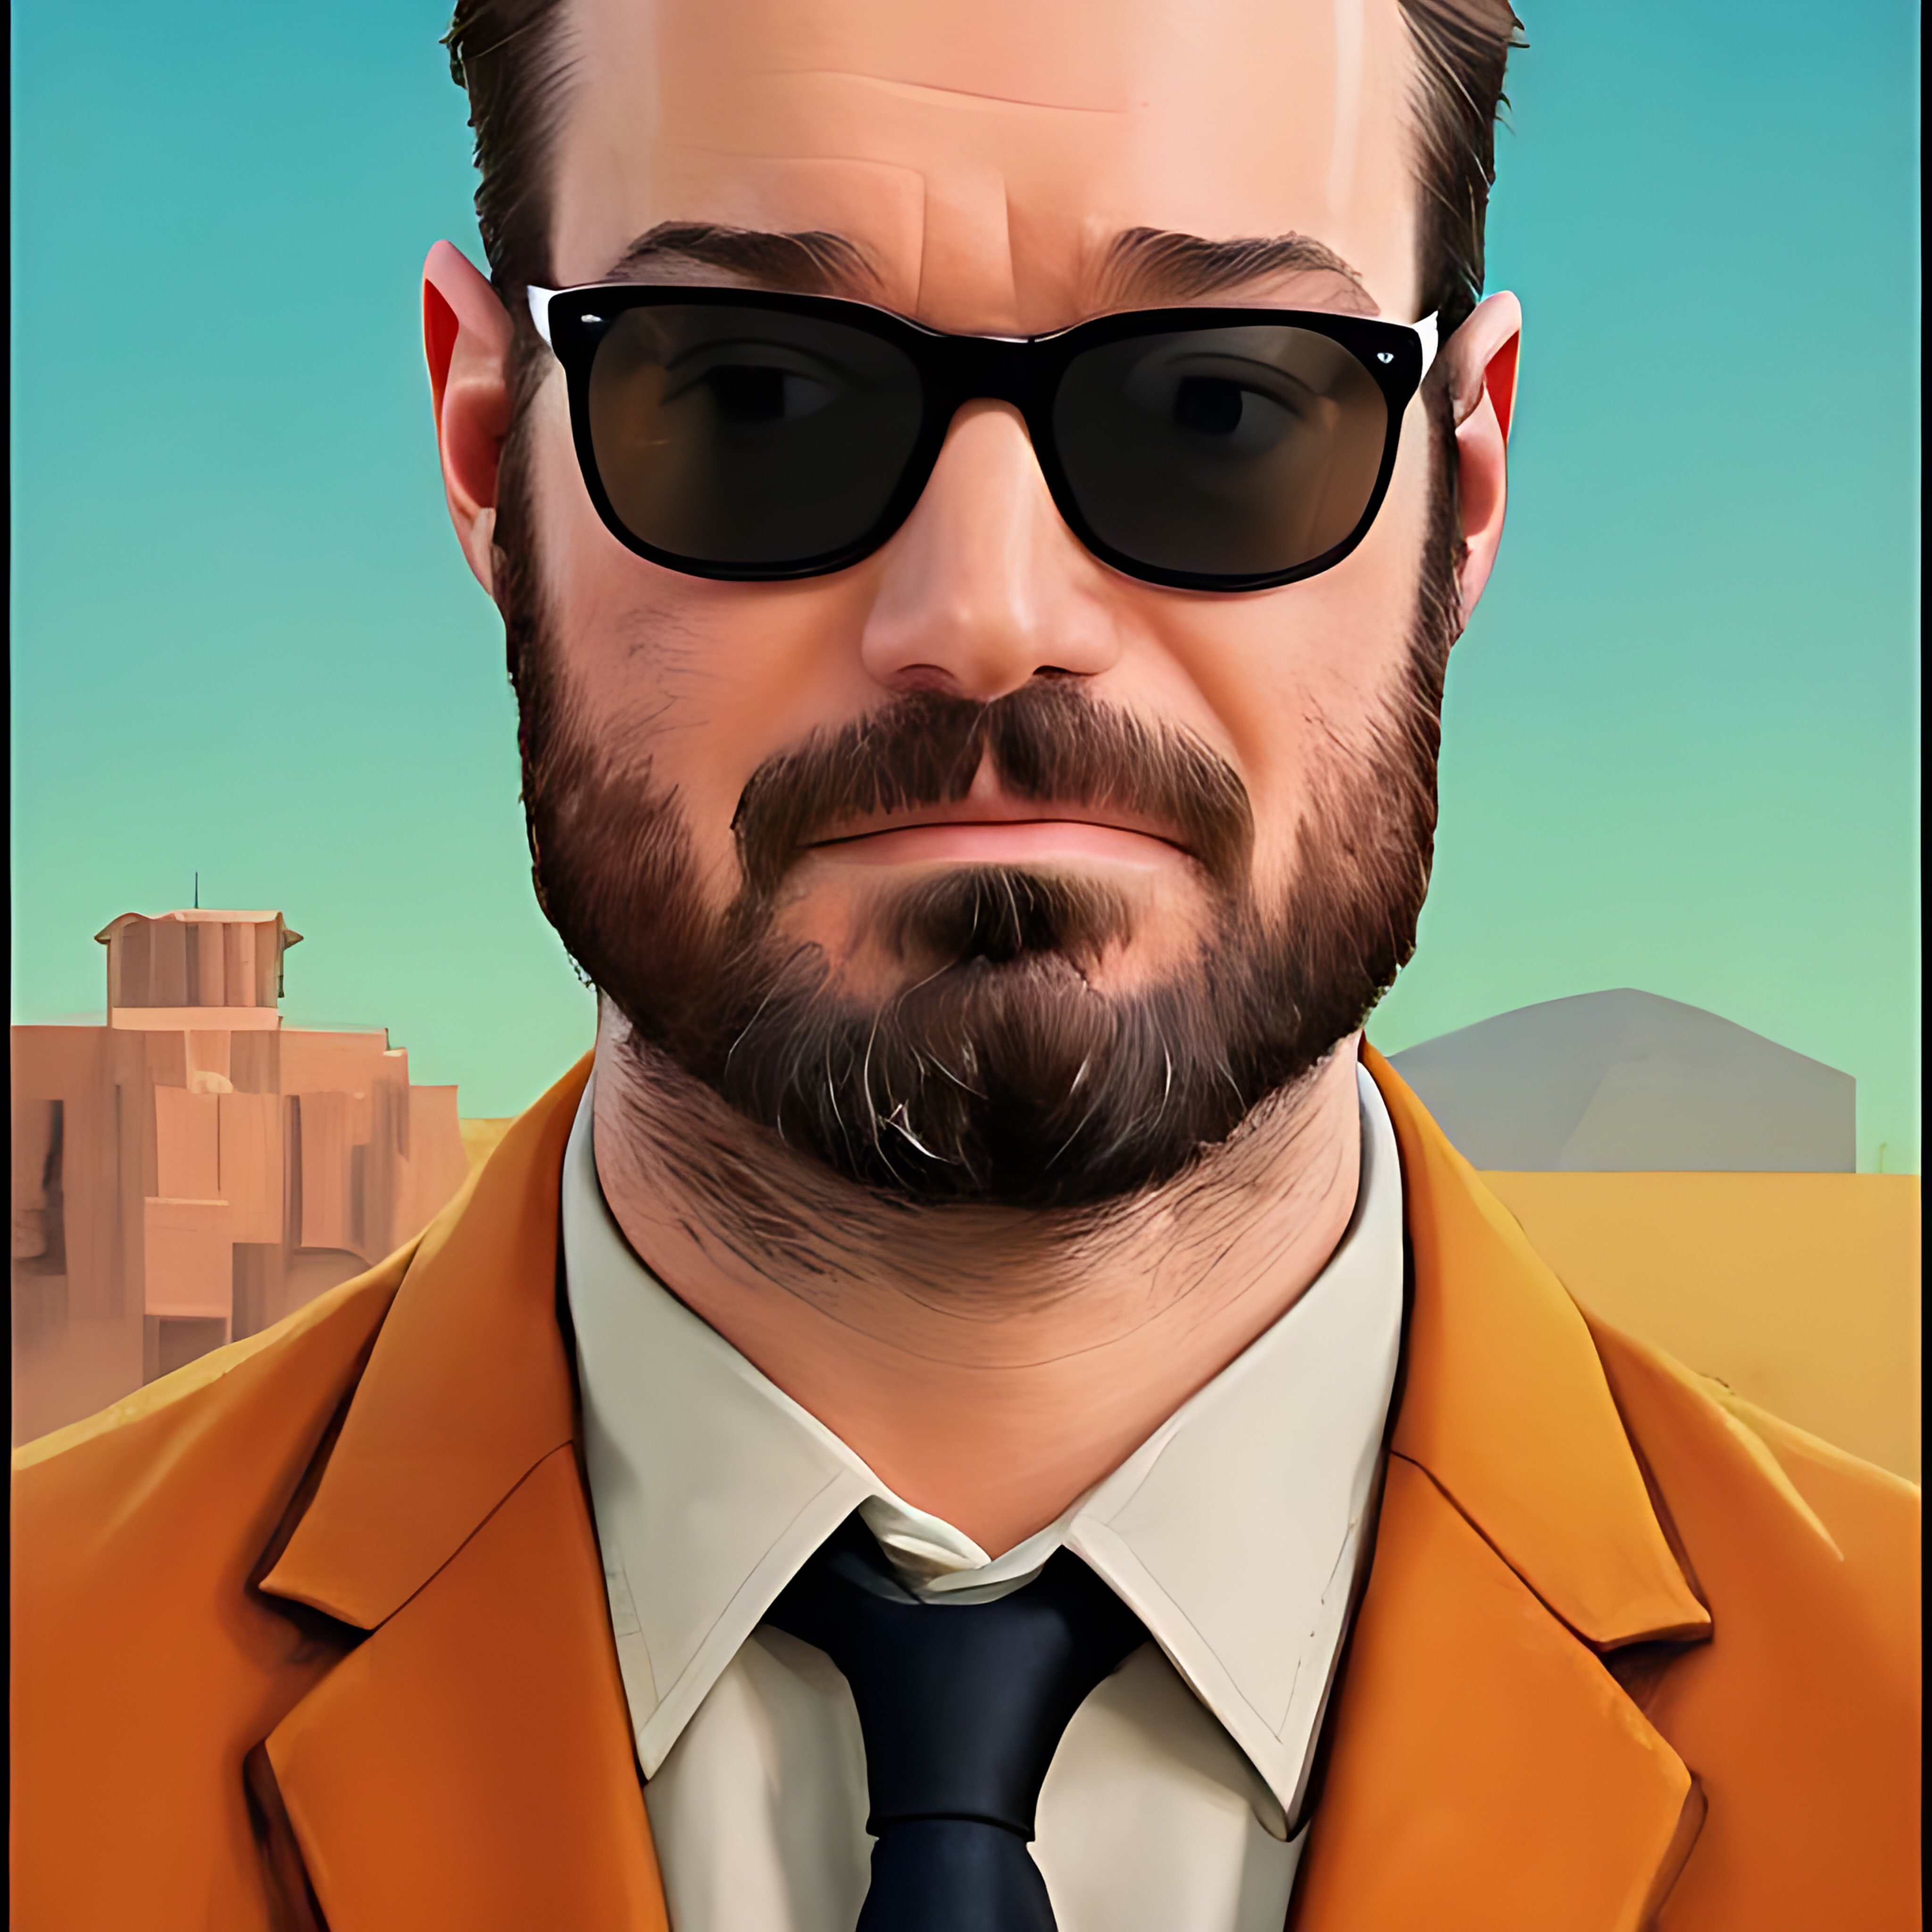 Man in a suit and tie, wearing sunglasses, in a desert